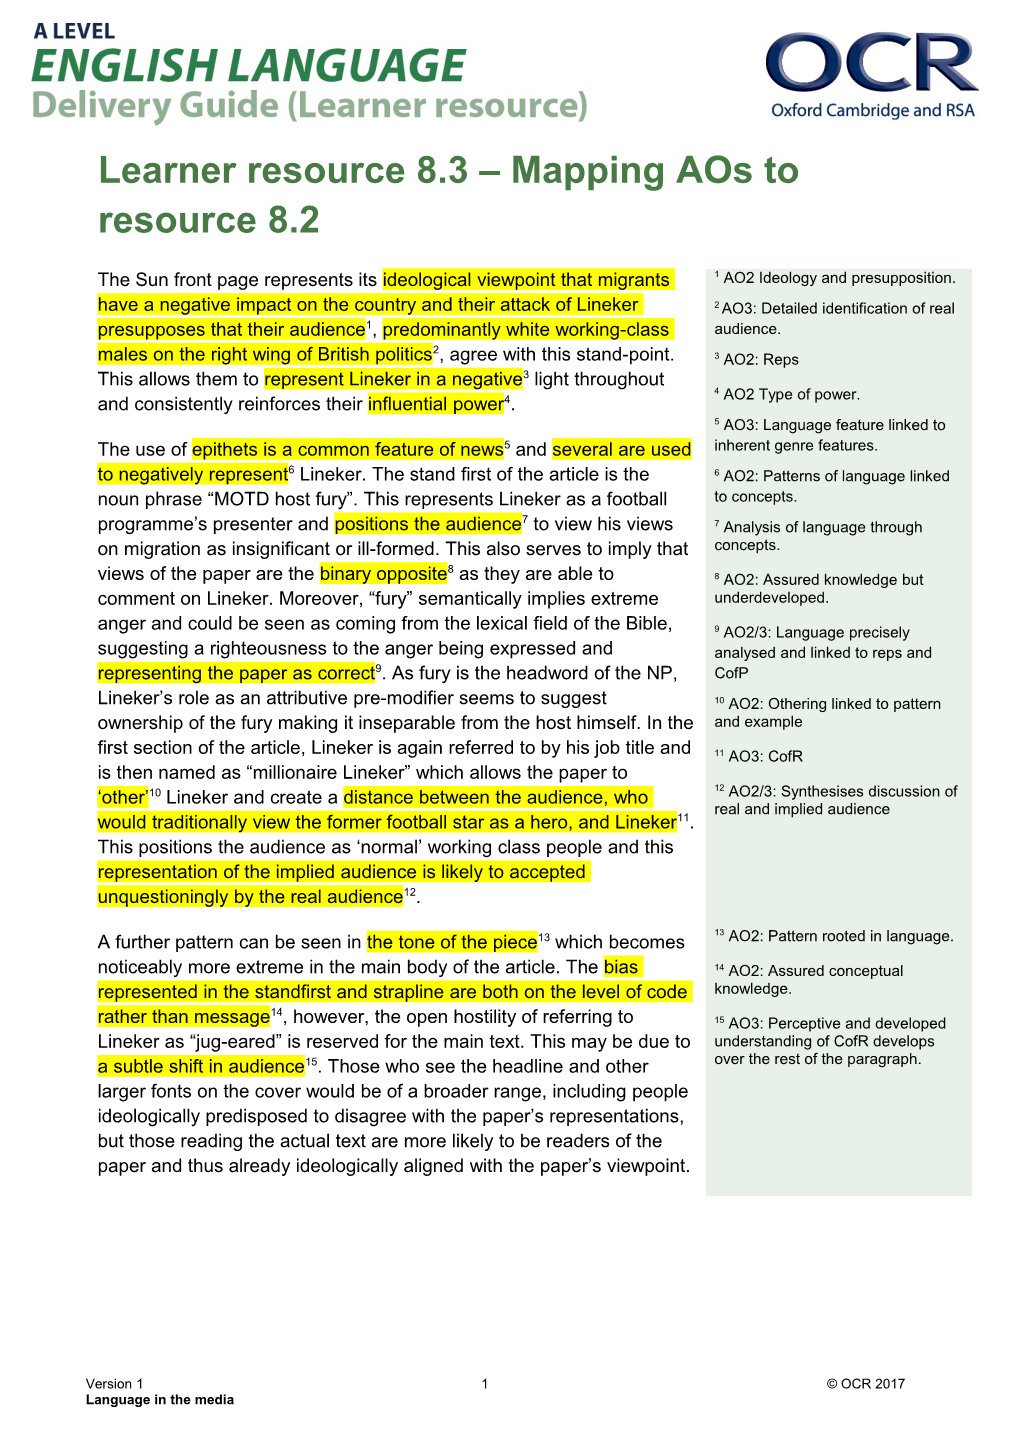 OCR a Level English Language Delivery Guide - Learner Resource 8.3 Use of Epithets